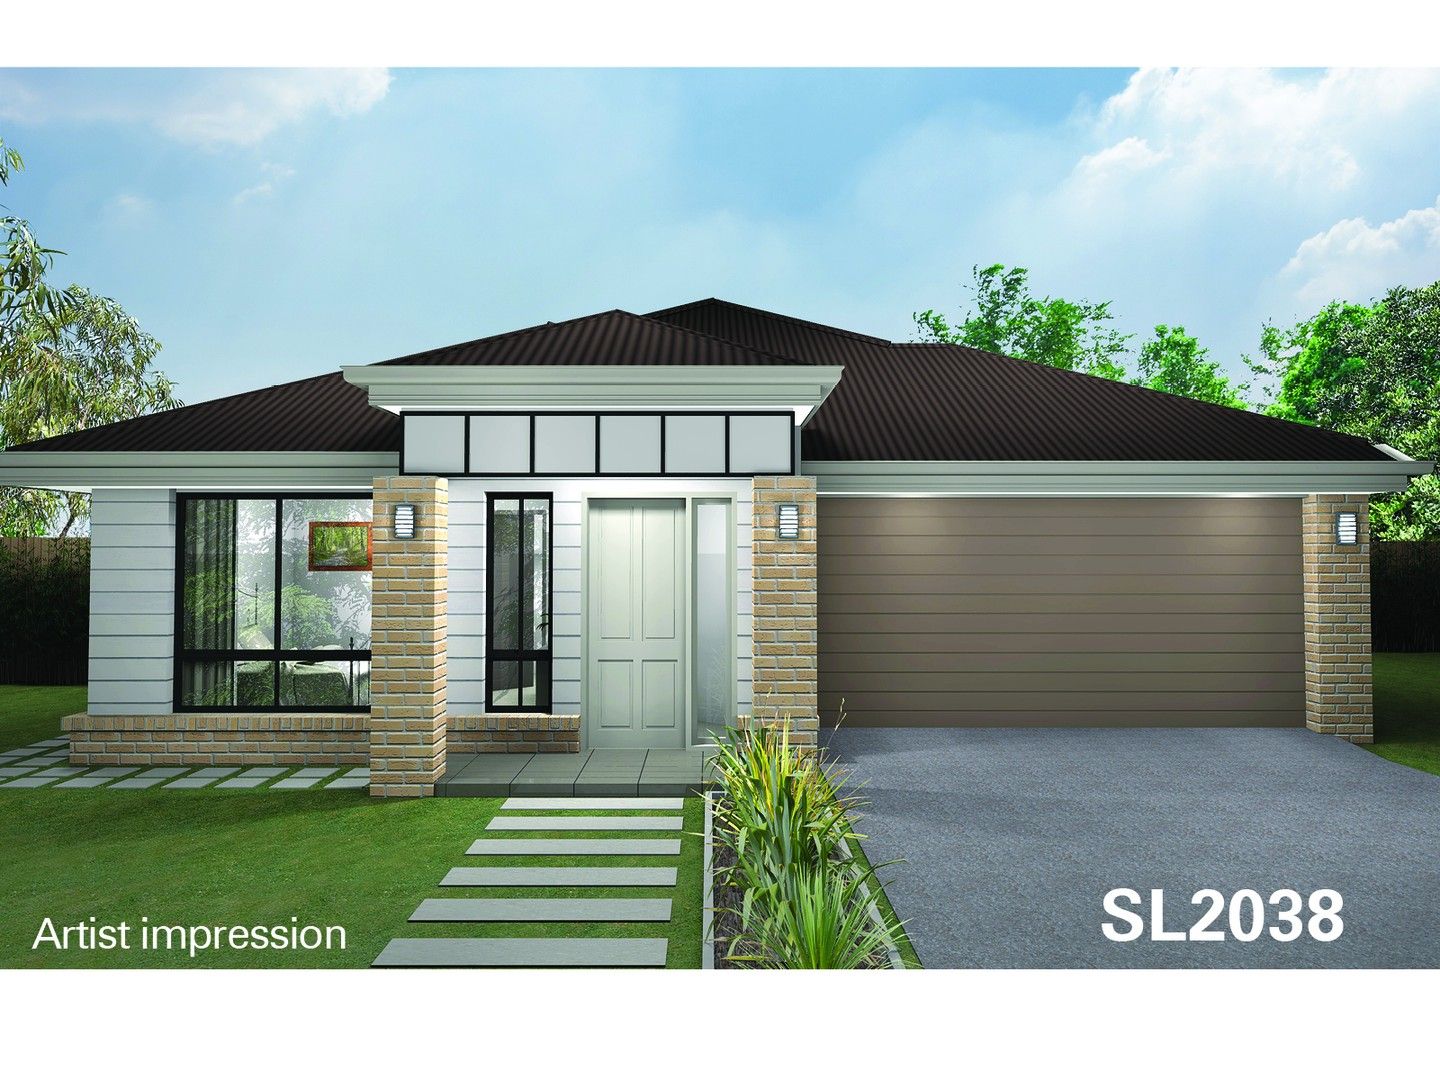 4 bedrooms New House & Land in Lot 1481 Stage 21 CABOOLTURE SOUTH QLD, 4510